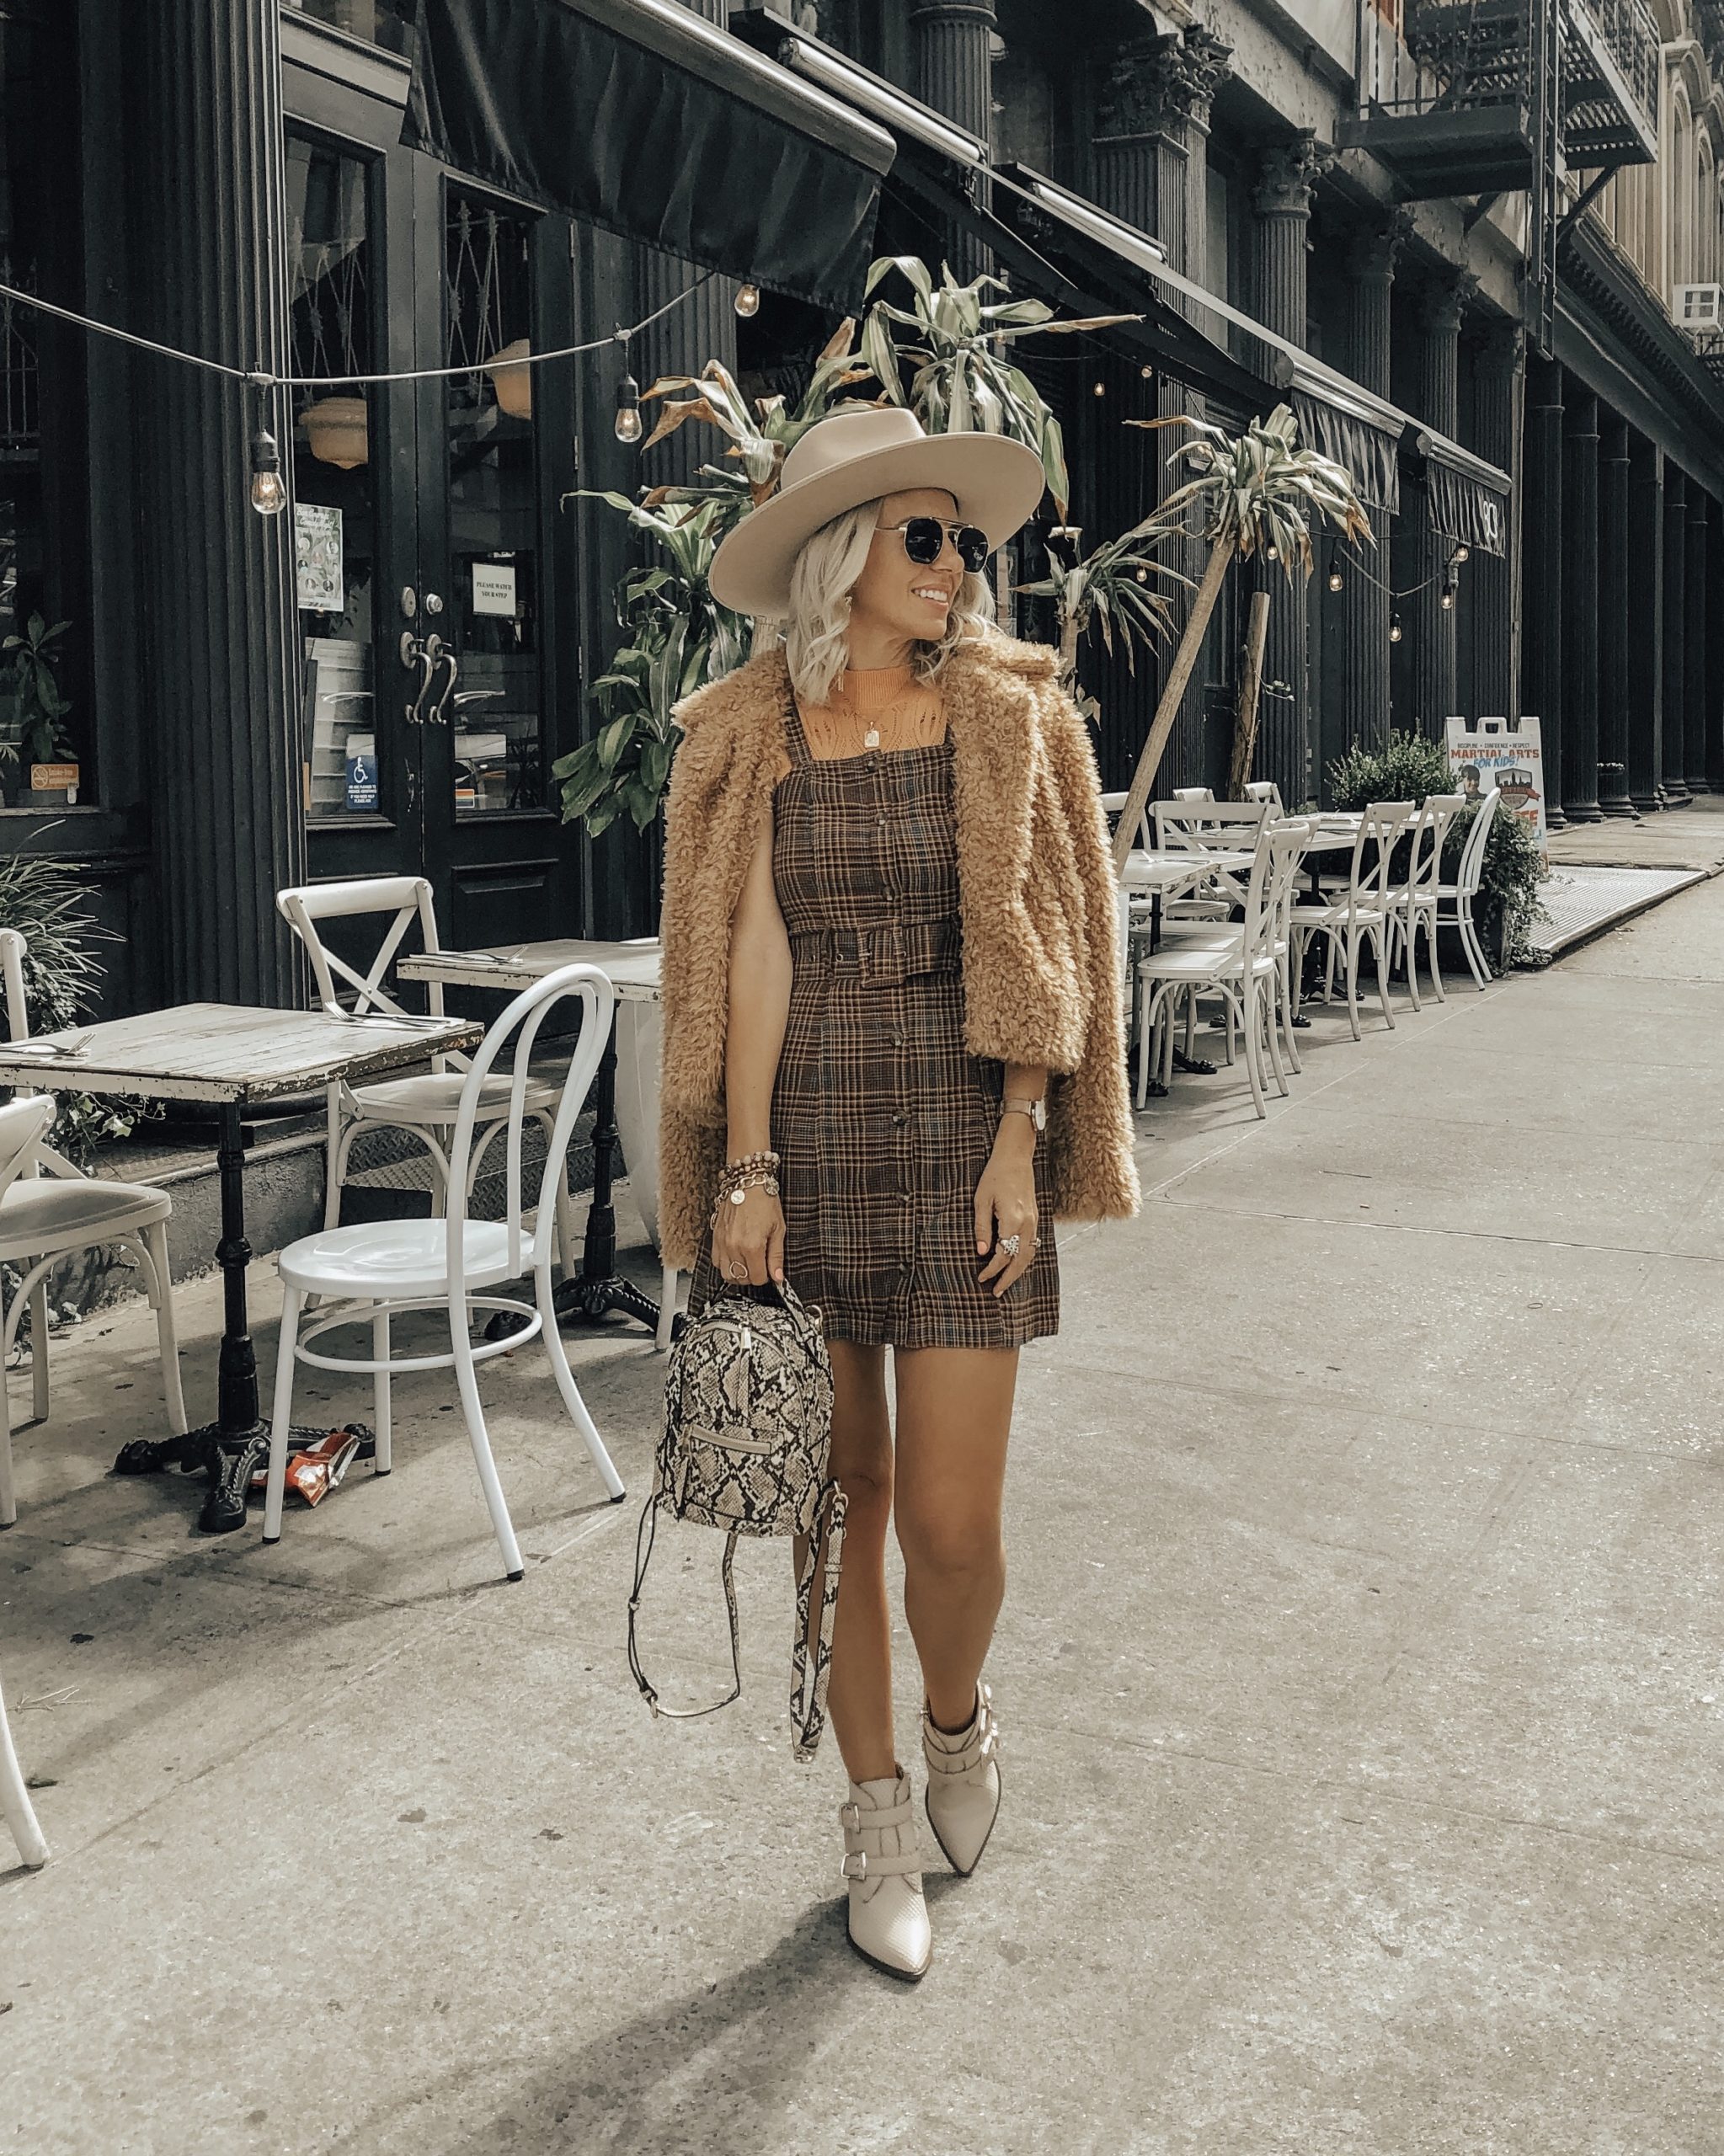 THE COZIEST FAUX FUR JACKETS + COATS- Jaclyn De Leon Style + Sharing the best of faux fur at great affordable price points. Throw it over a graphic tee + jeans or a plaid dress for a dressier look